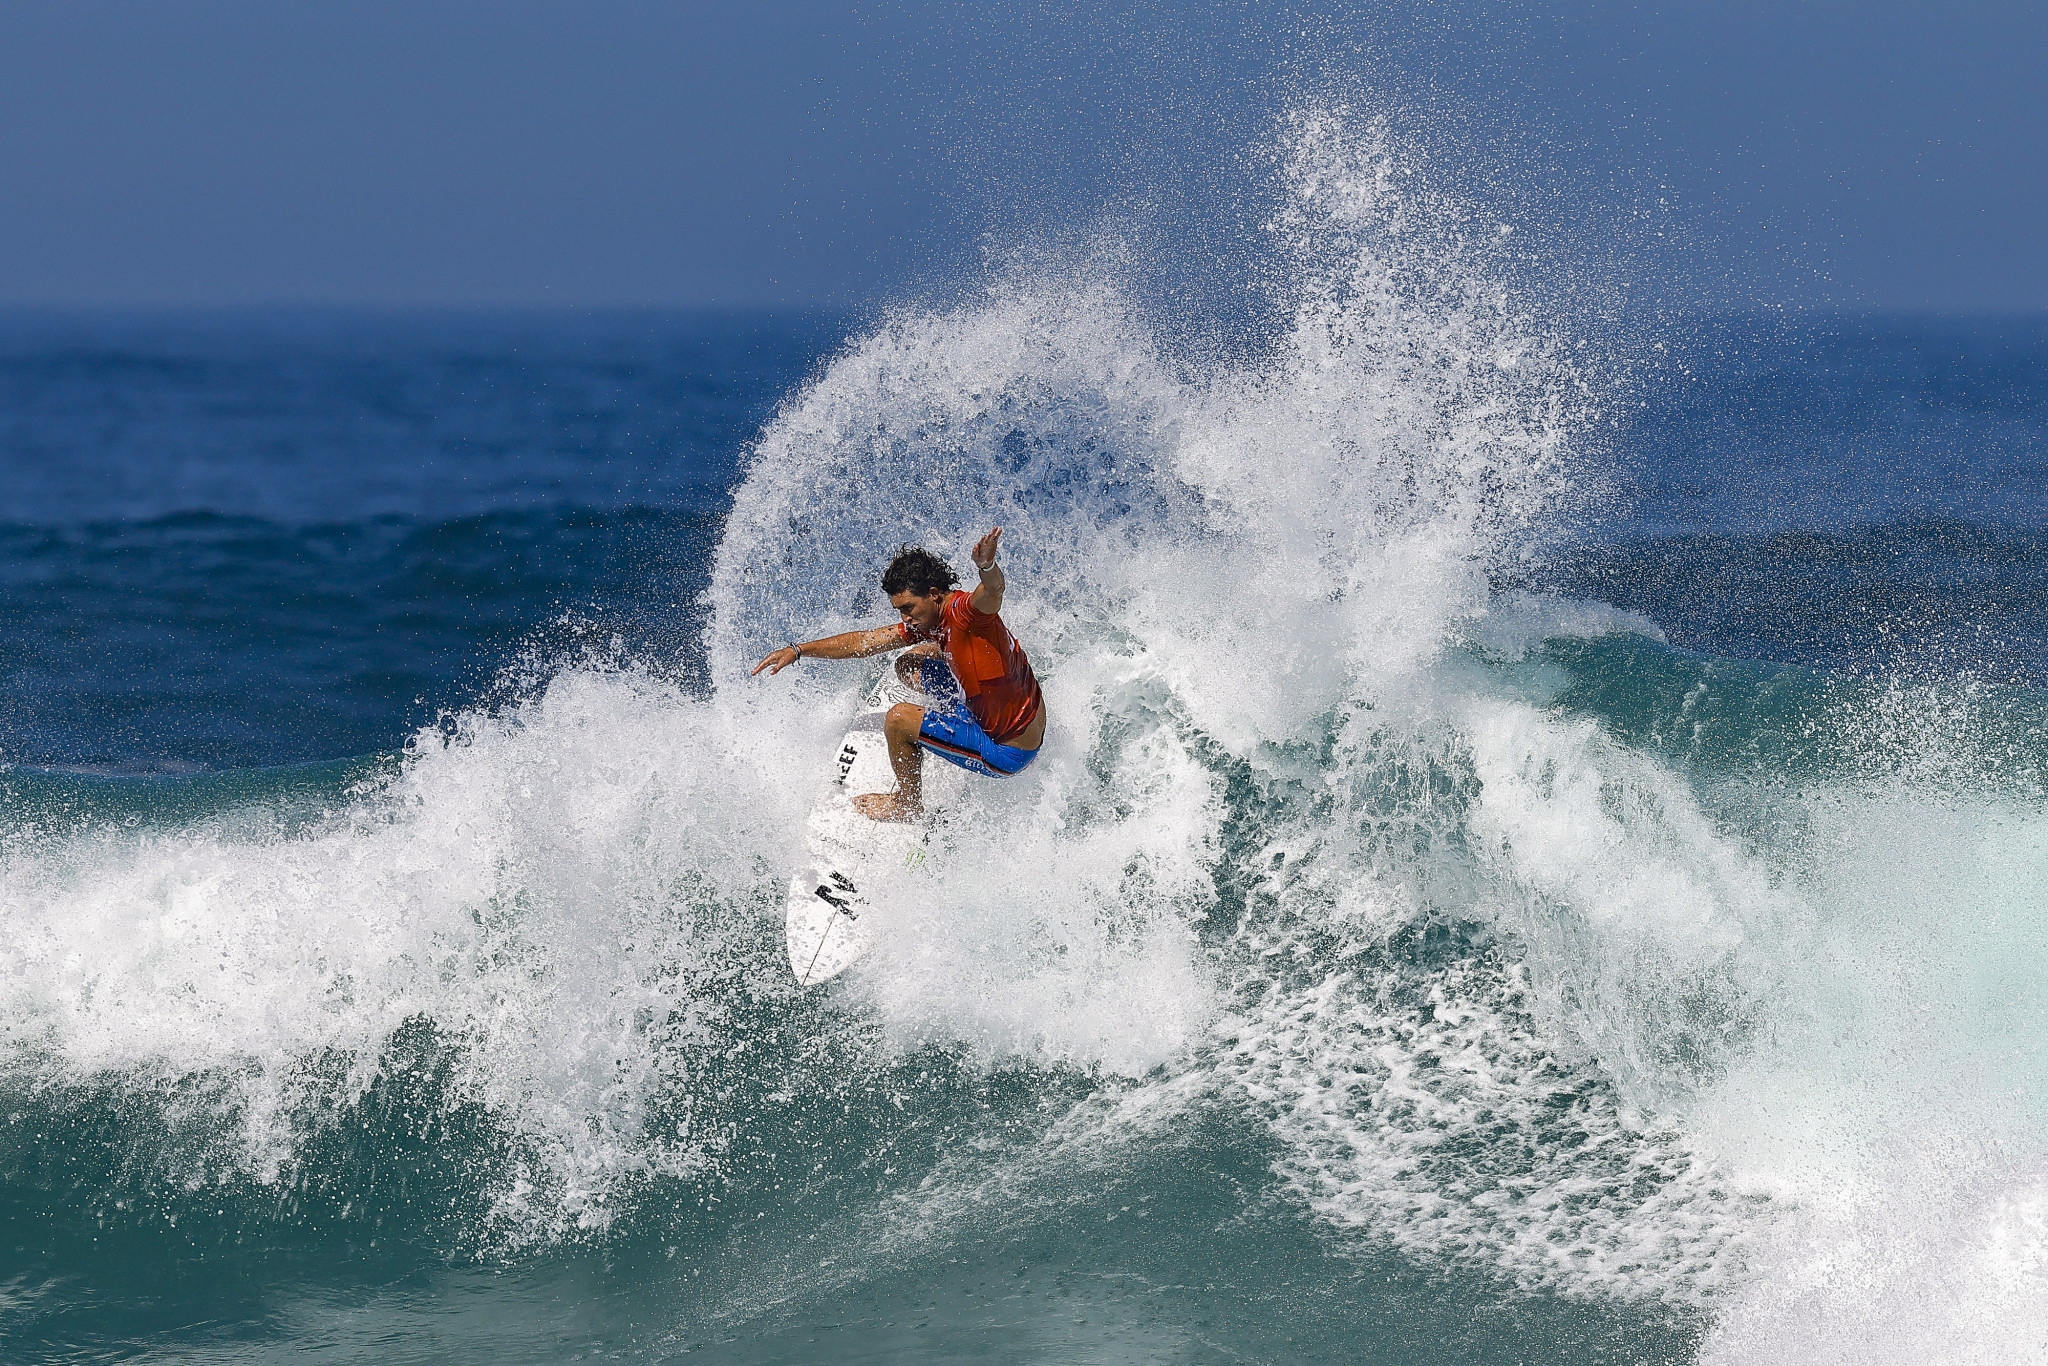 Griffin Colapinto impressed at the World Surfing Games ©Getty Images